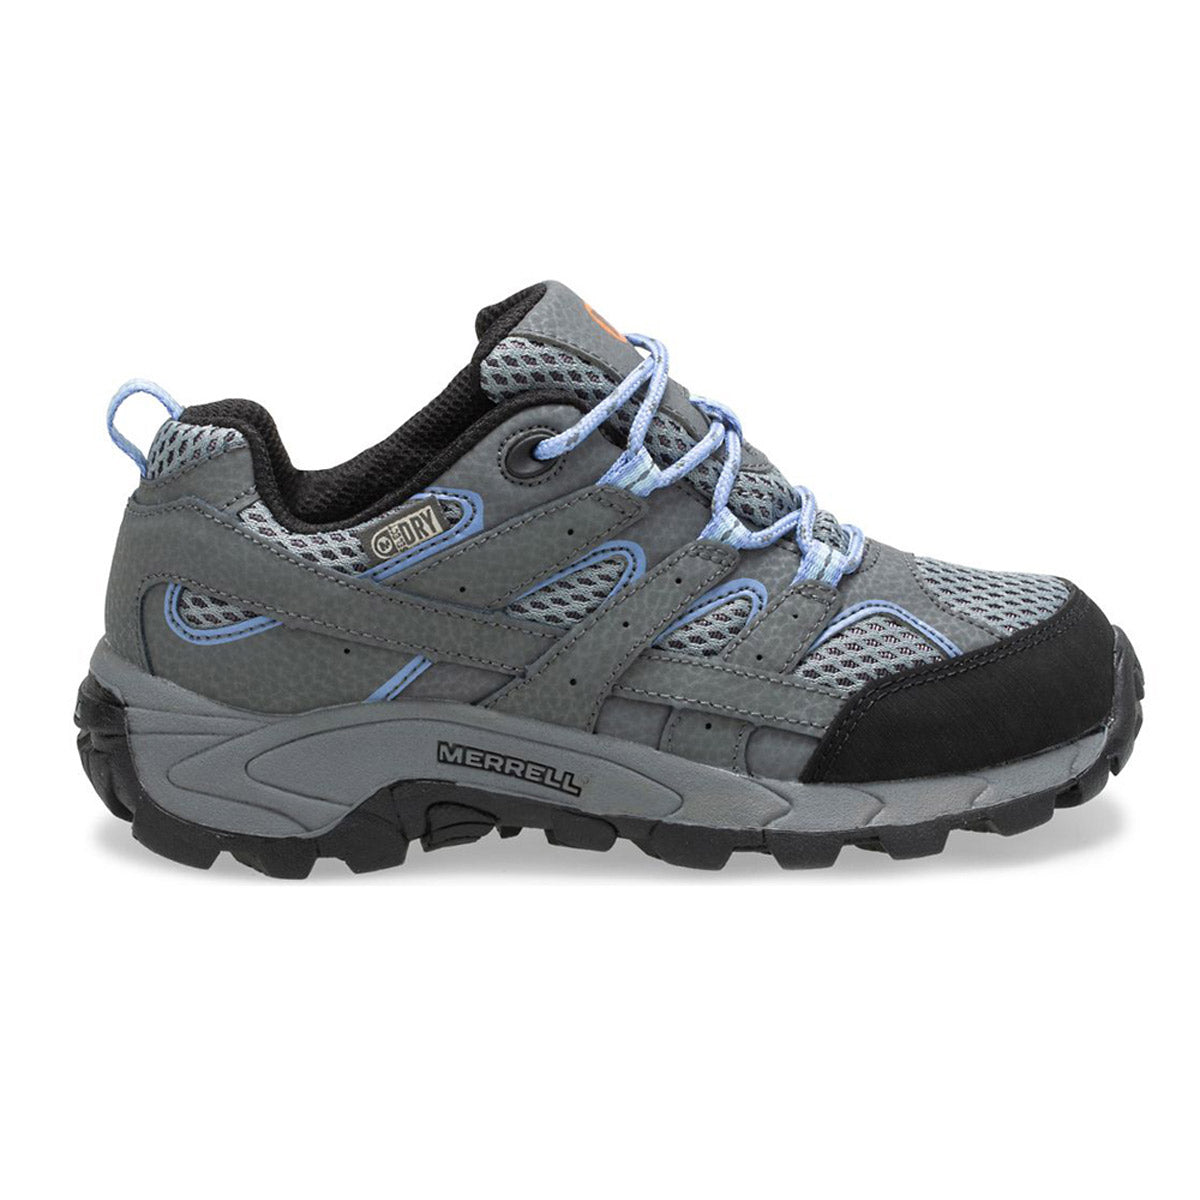 A single grey Merrell Moab 2 Low Lace Waterproof hiking shoe with periwinkle accents.